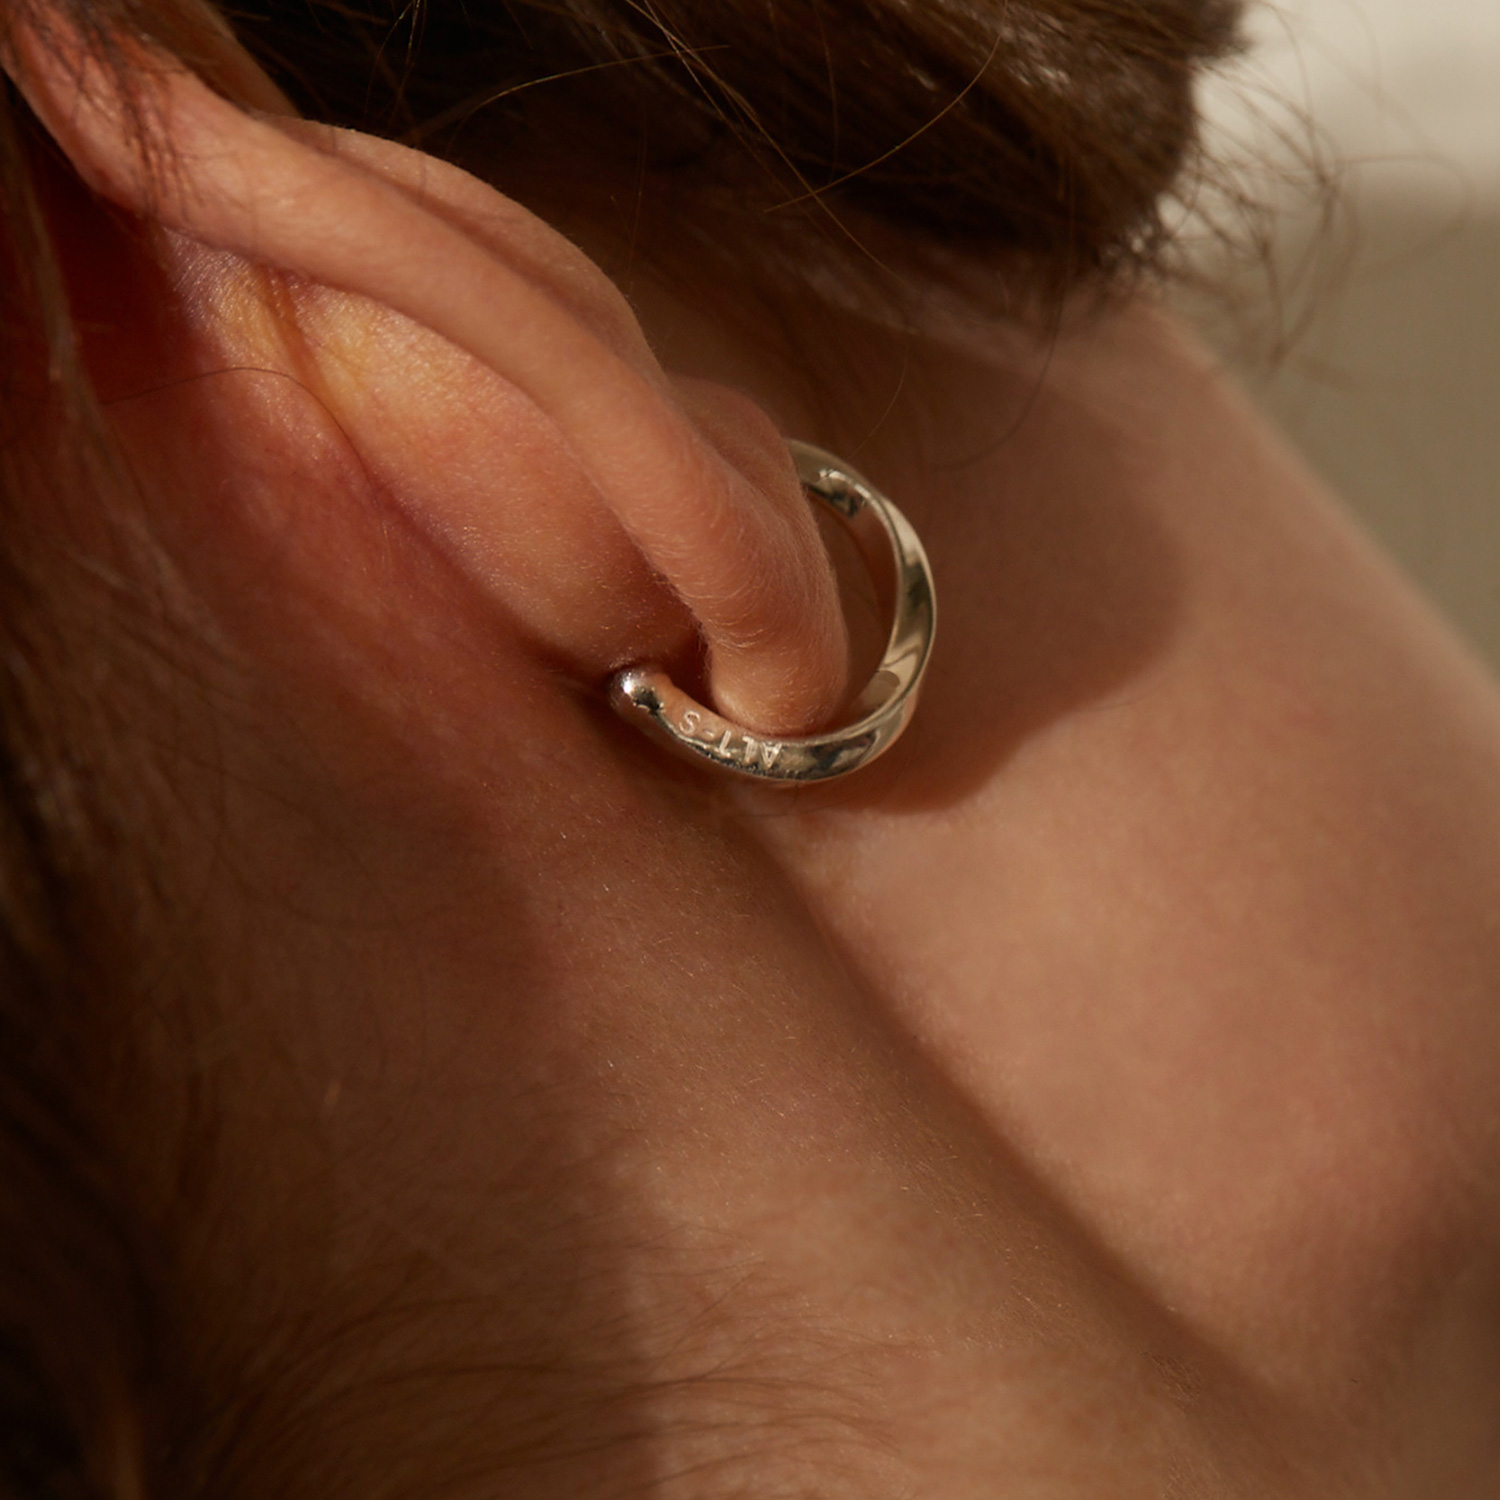 Common Ear Cuff Ring by ALT-S
